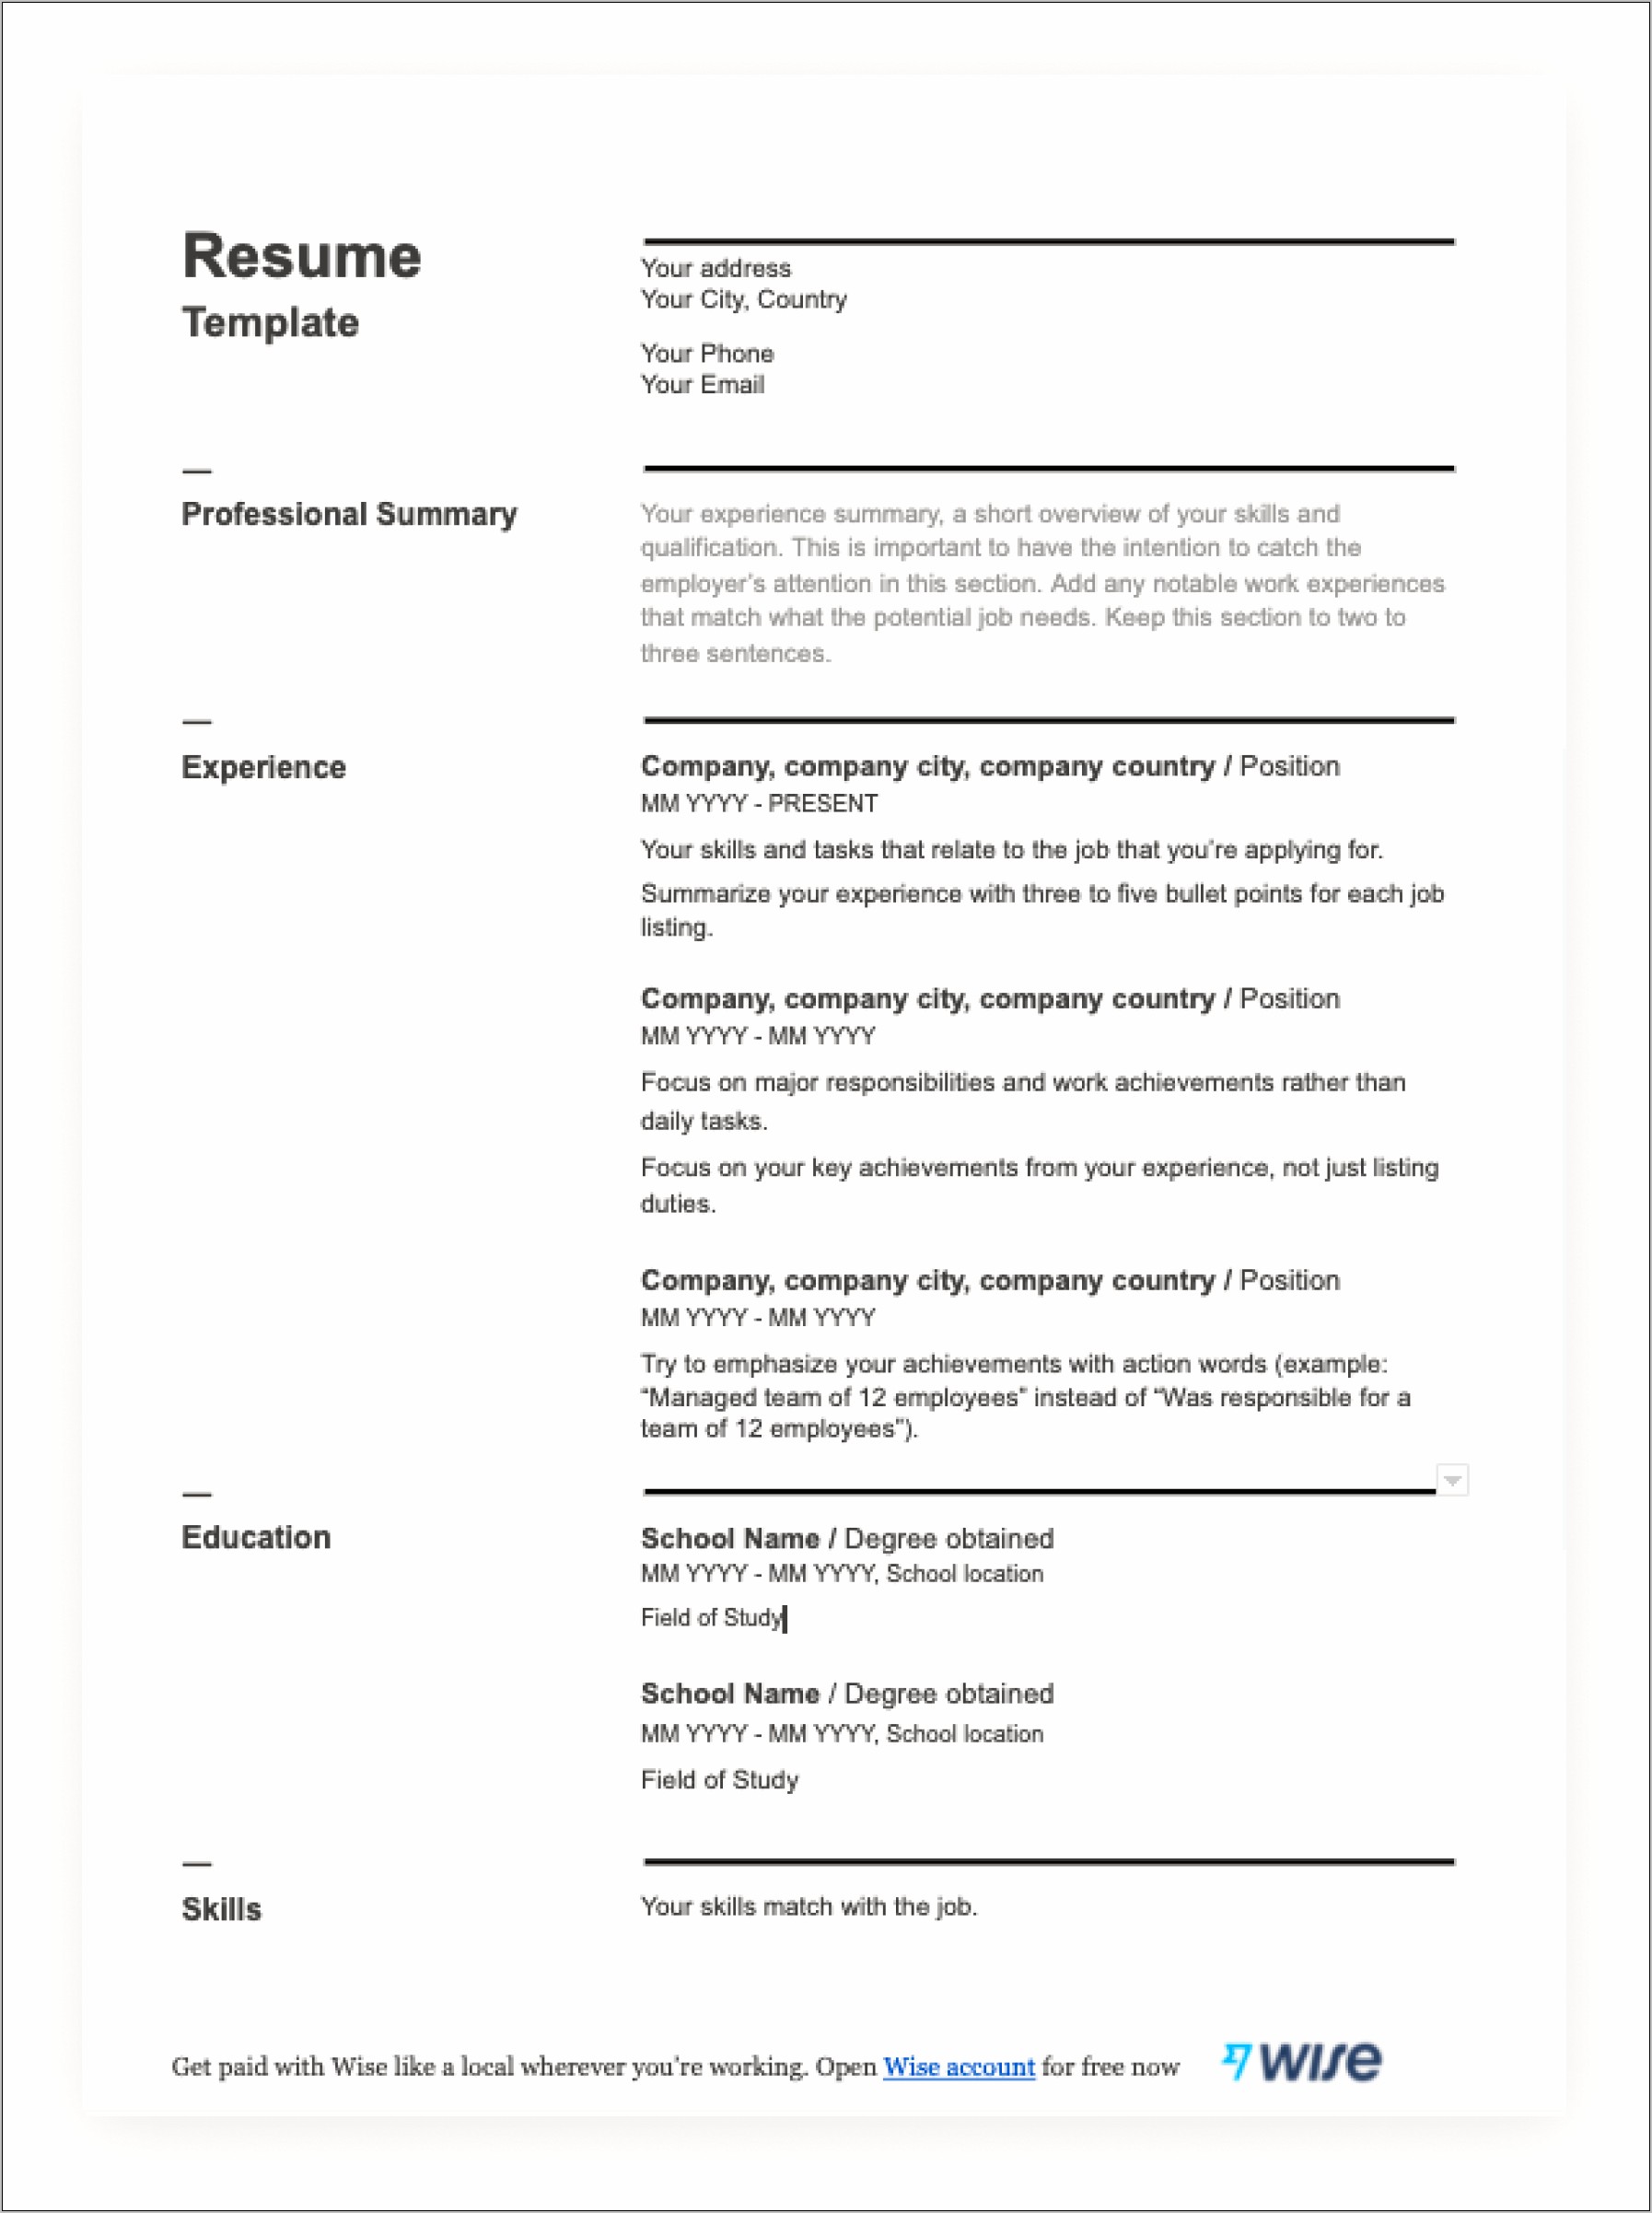 Simple Resume Template That Gets The Job